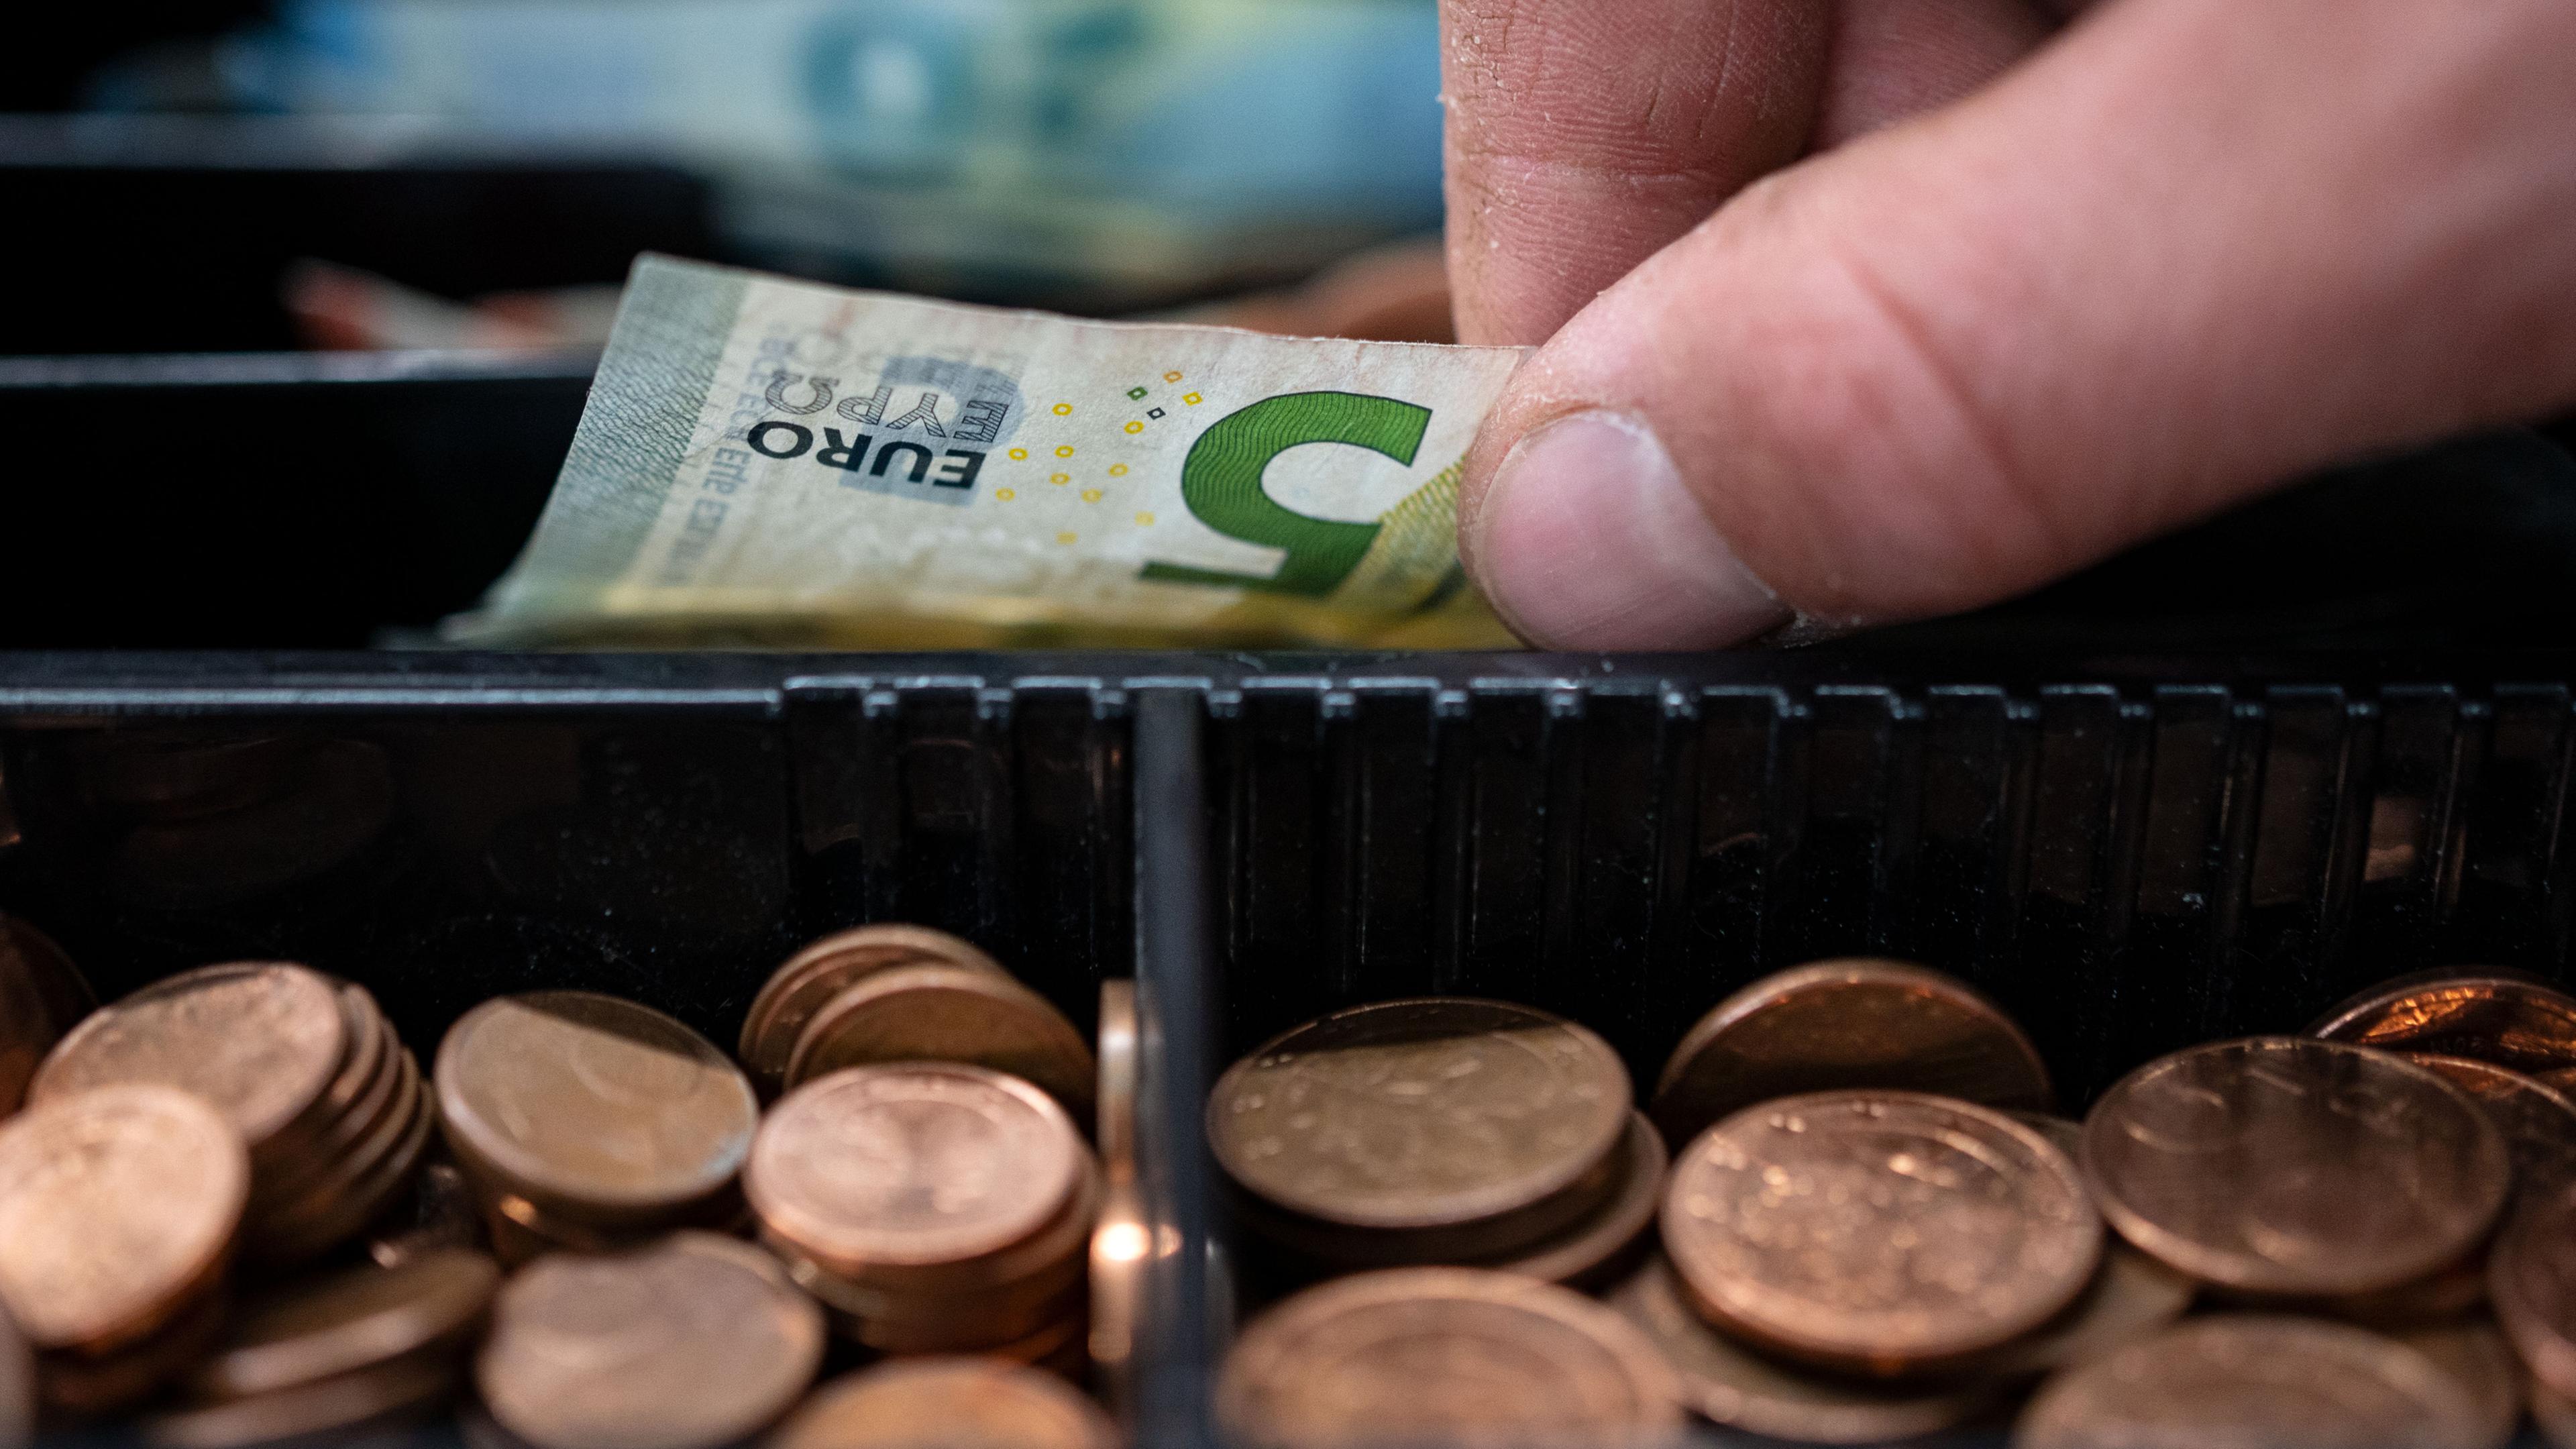 5 euro banknotes in the cash register